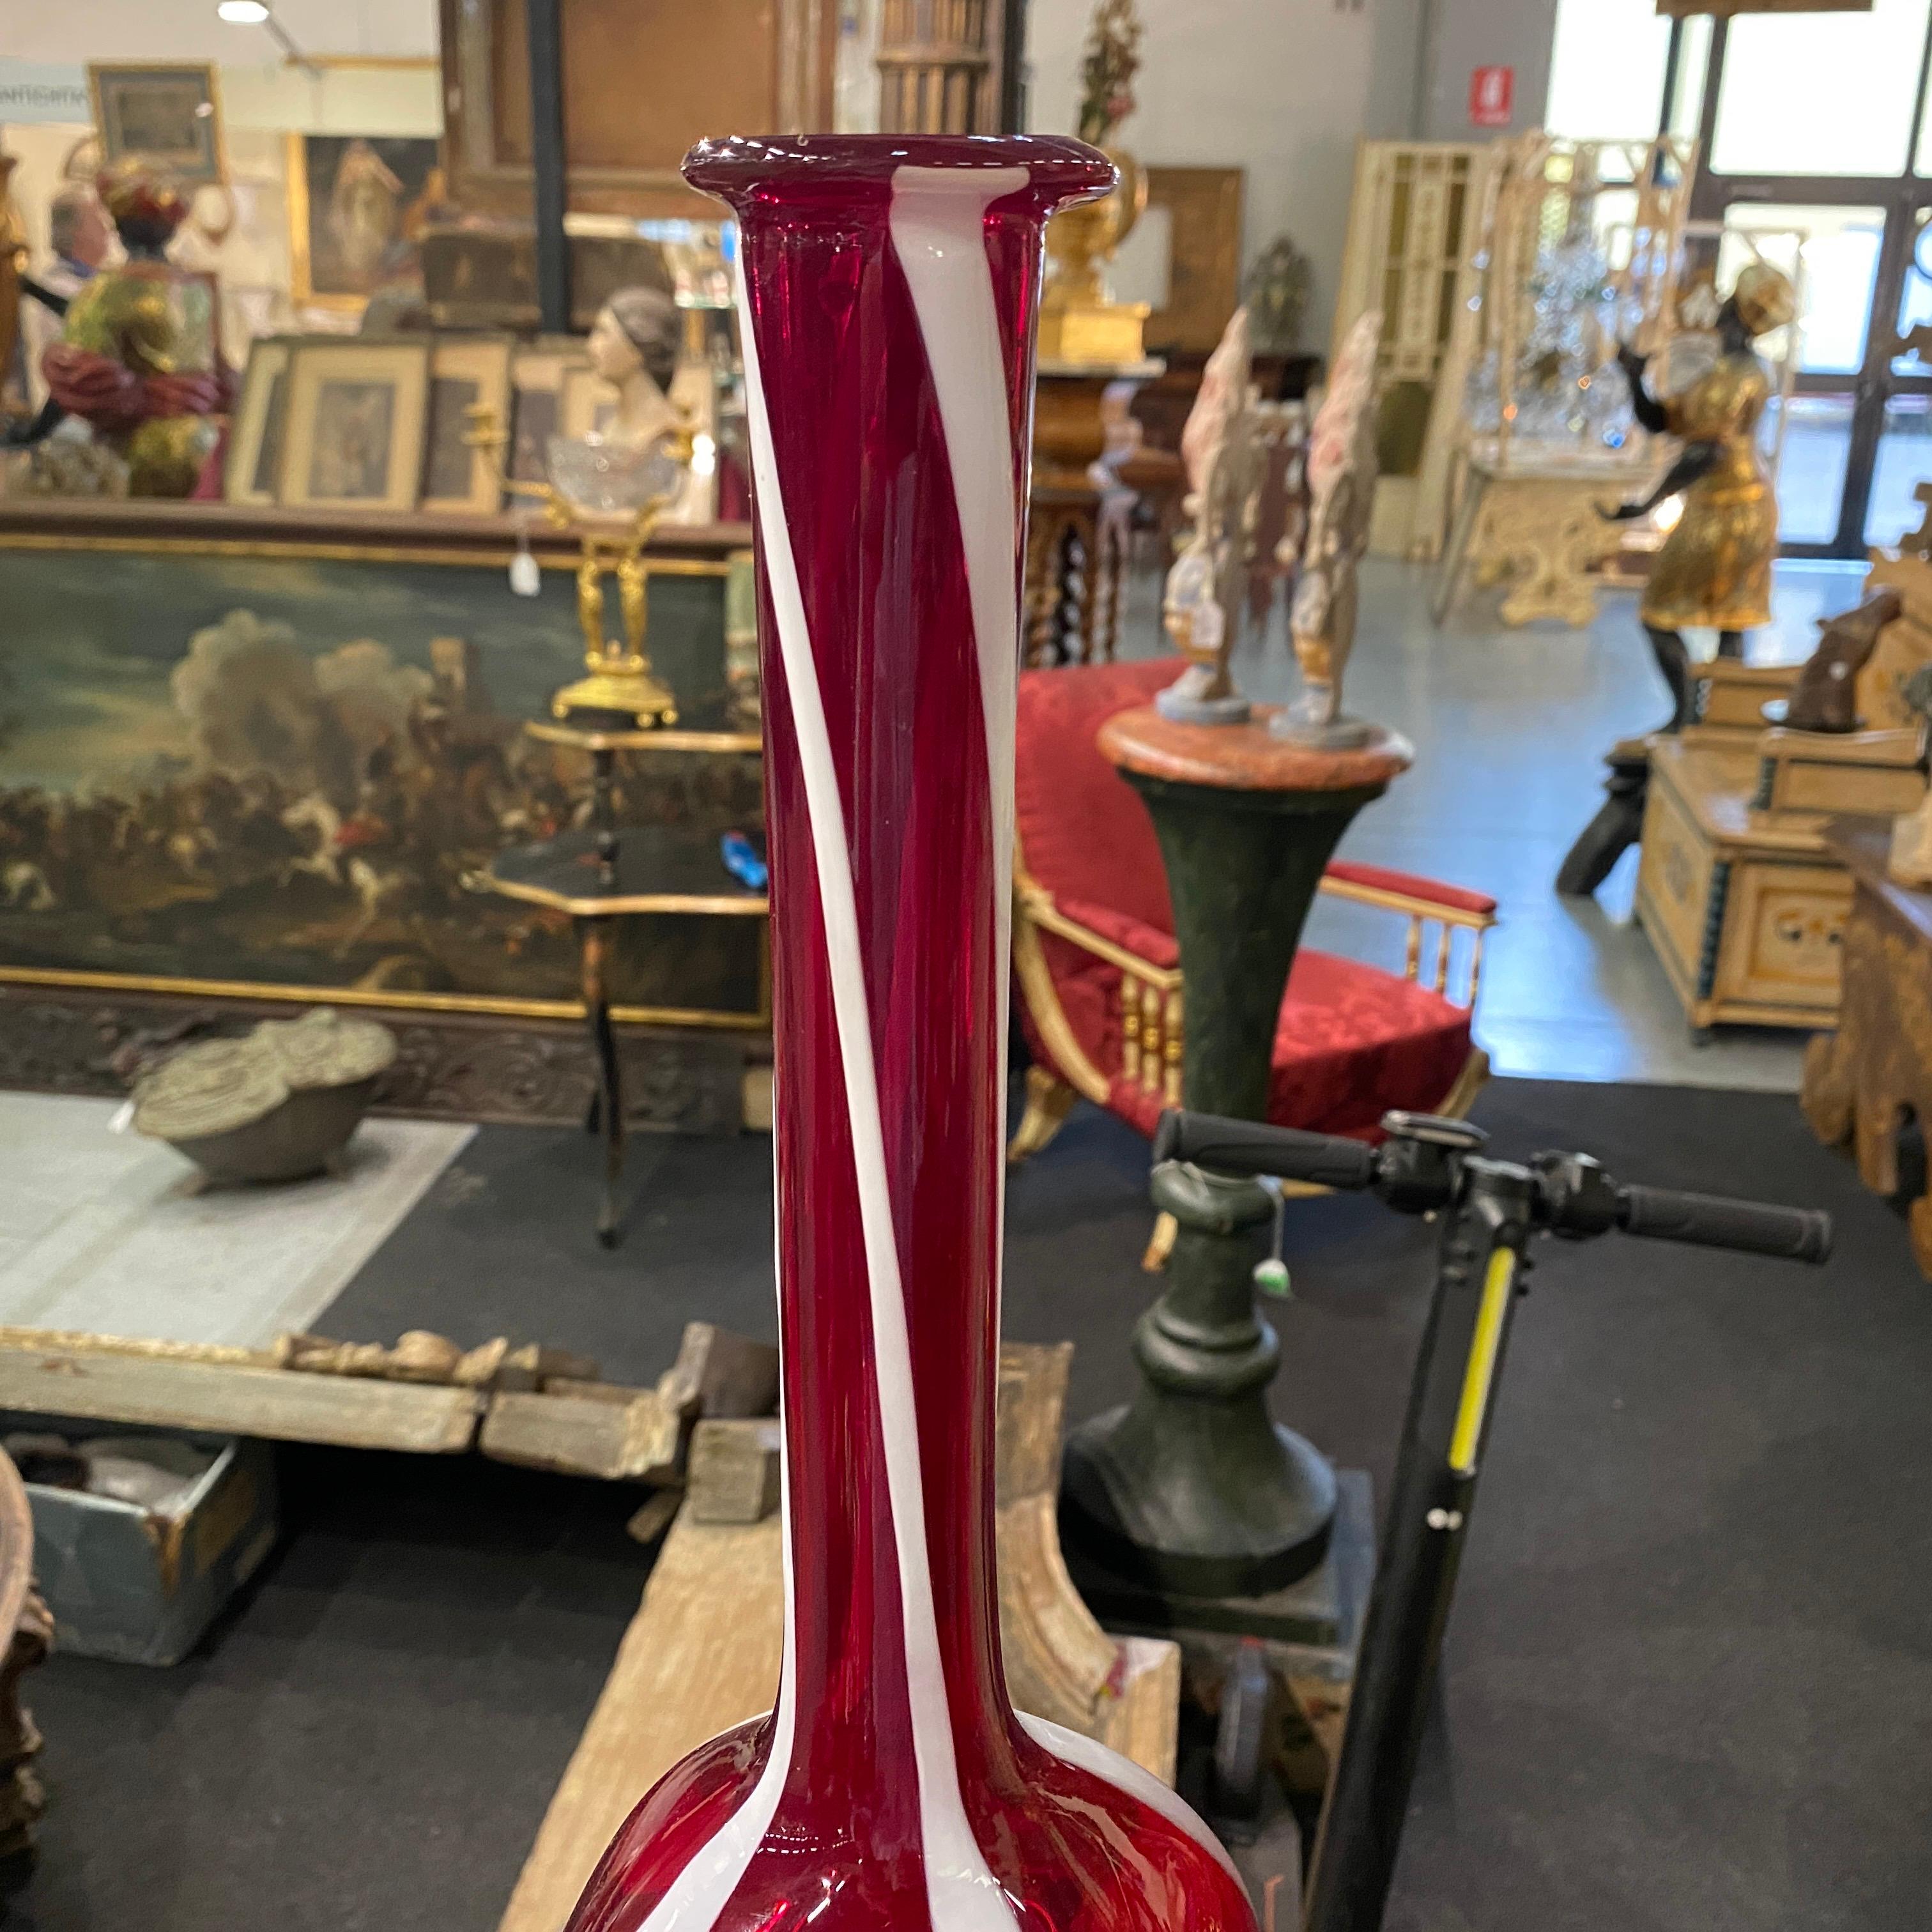 1980s Modernist Red and White Tall Murano Glass Bottle Vase by Carlo Moretti For Sale 2